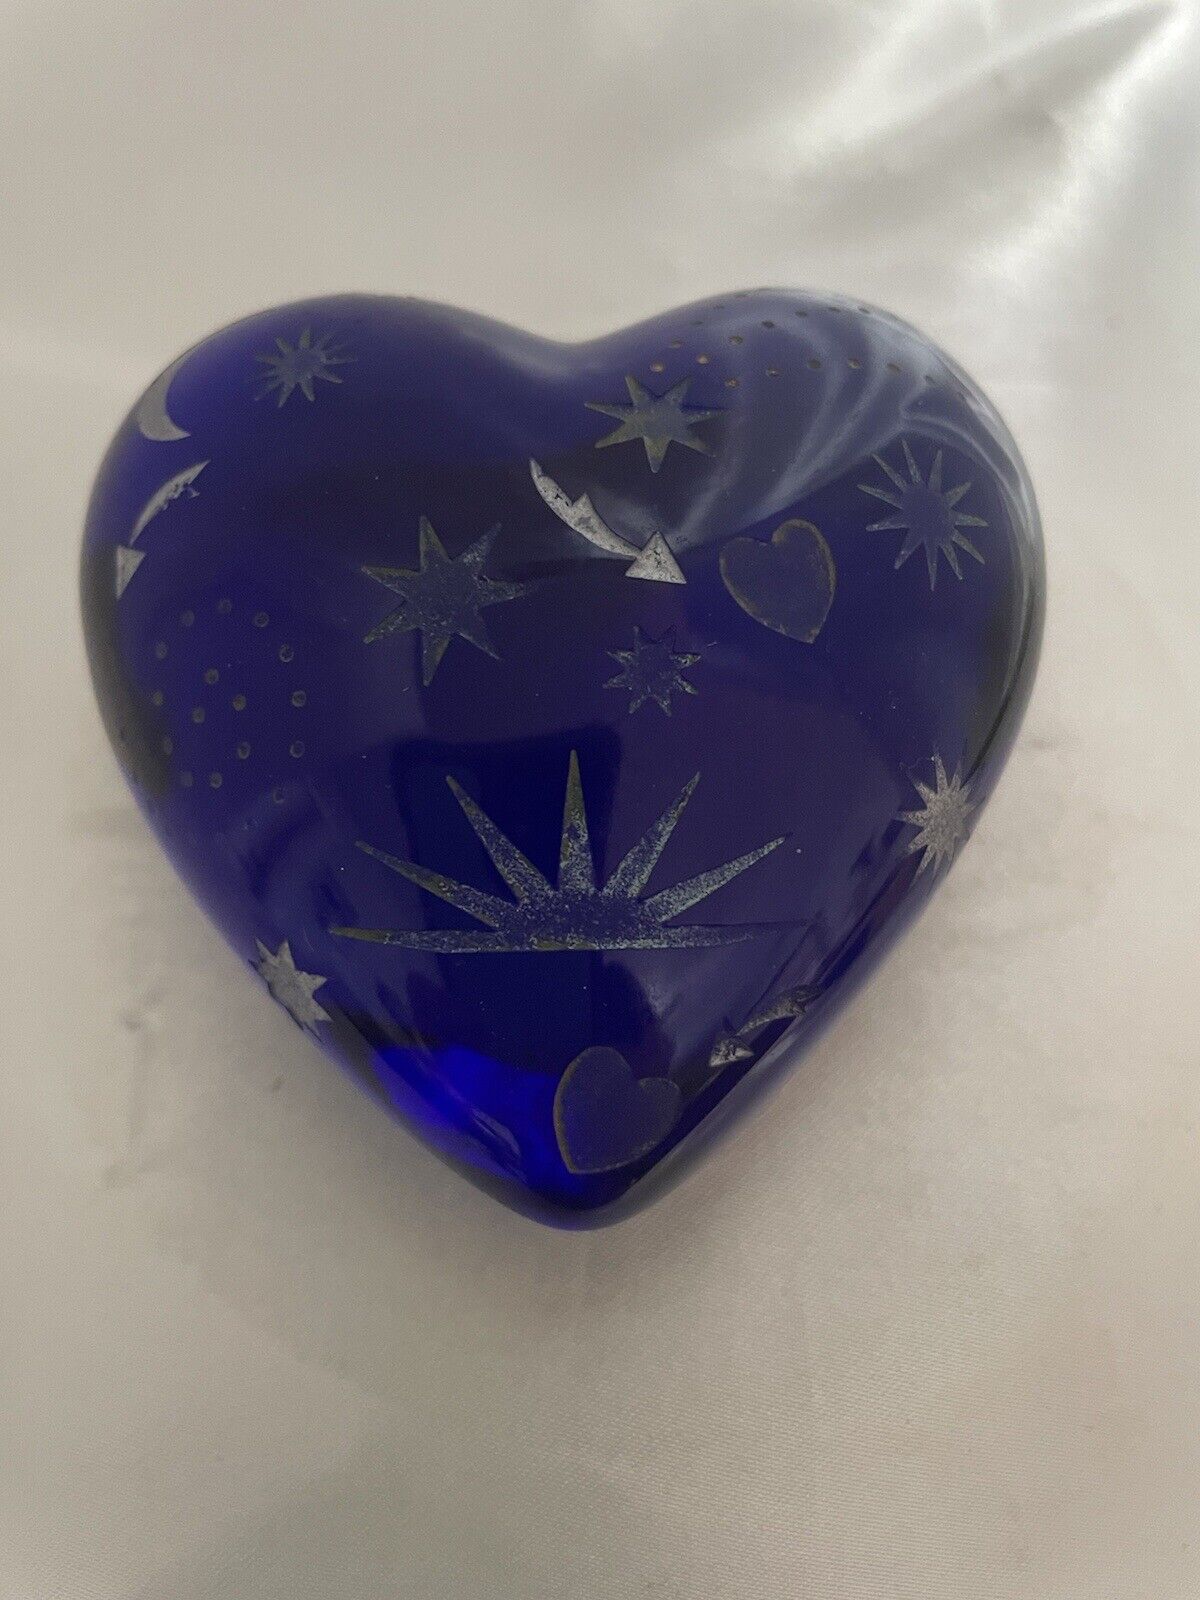 Vtg Cobalt Blue Heart Paperweight W/ Etched Star Moon Sun Signed 2004